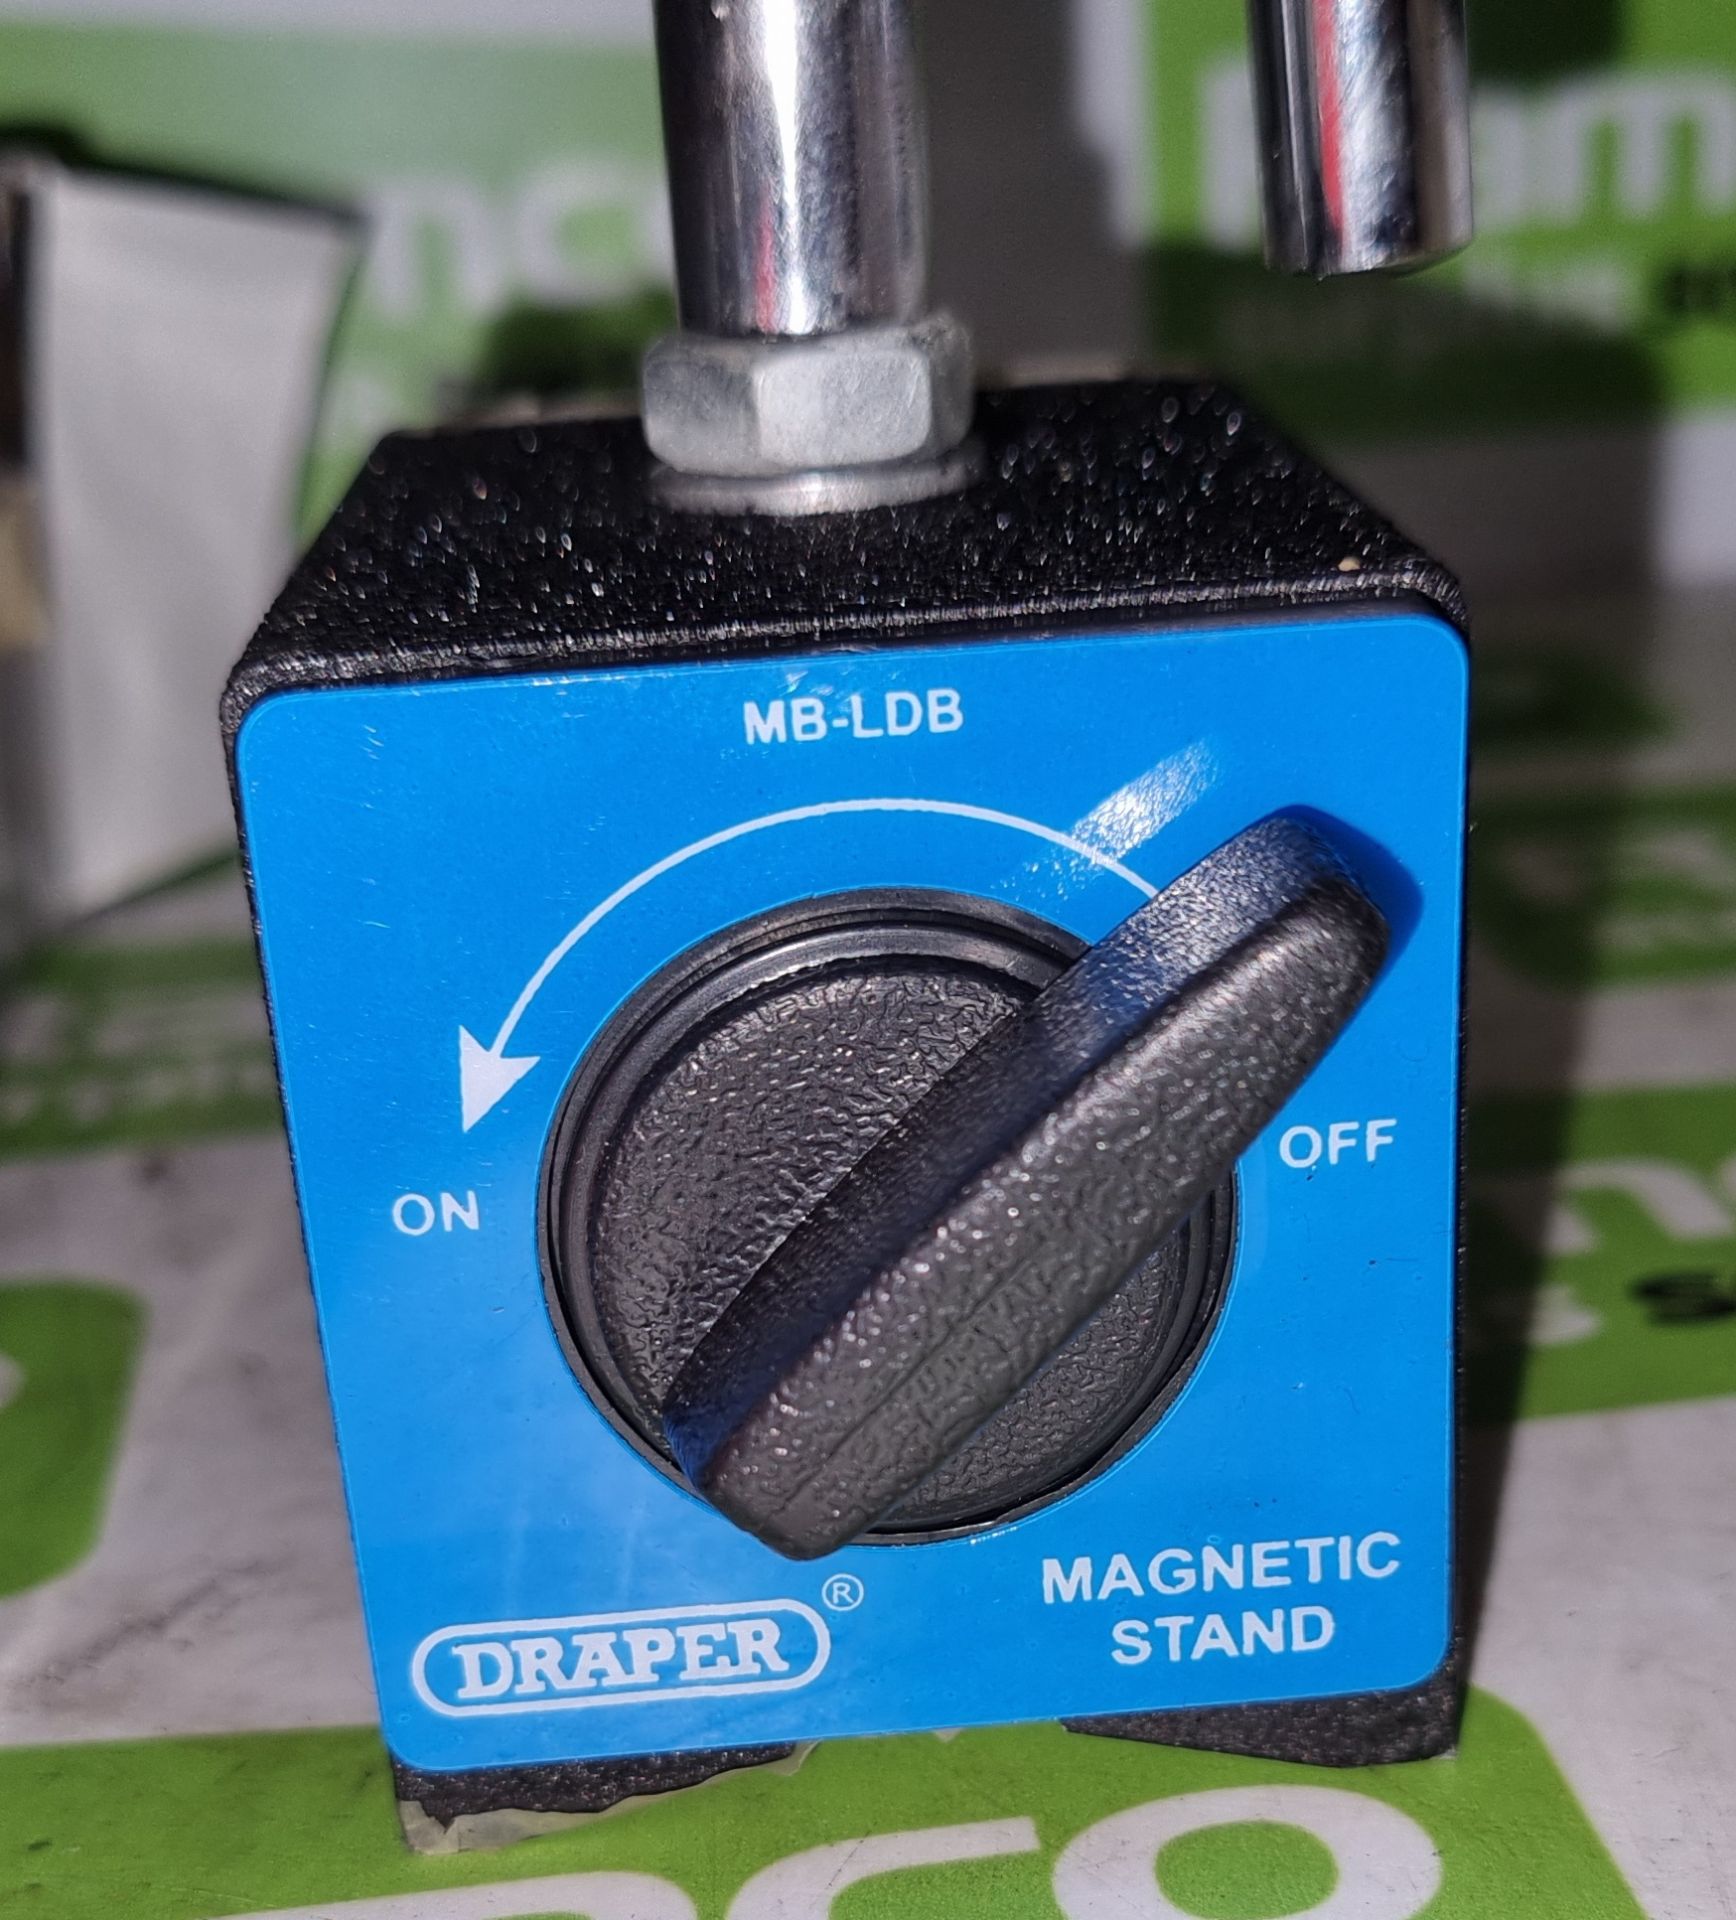 Draper 240mm magnetic stand - Image 2 of 4